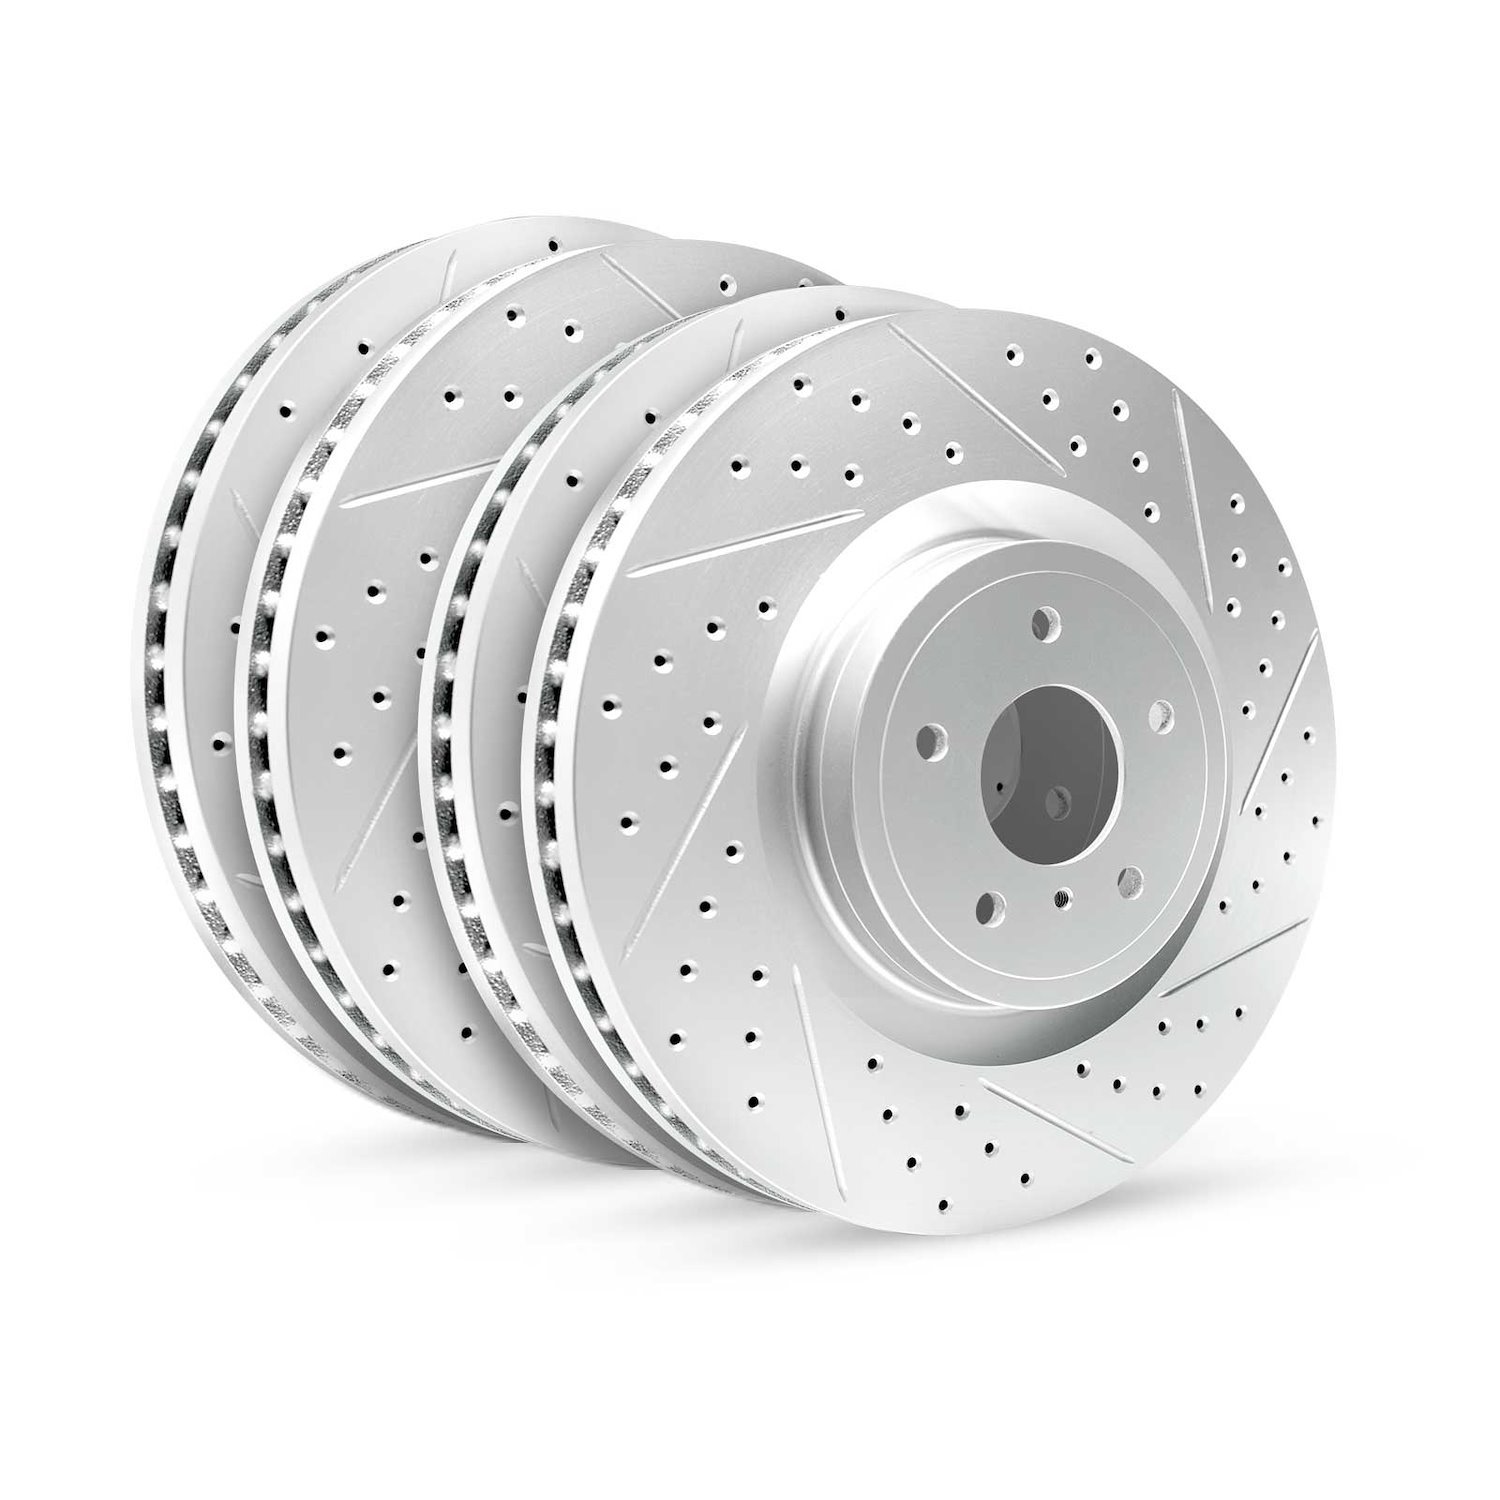 GEO-Carbon Drilled/Slotted Rotors, 2002-2008 Fits Multiple Makes/Models, Position: Front/Rear